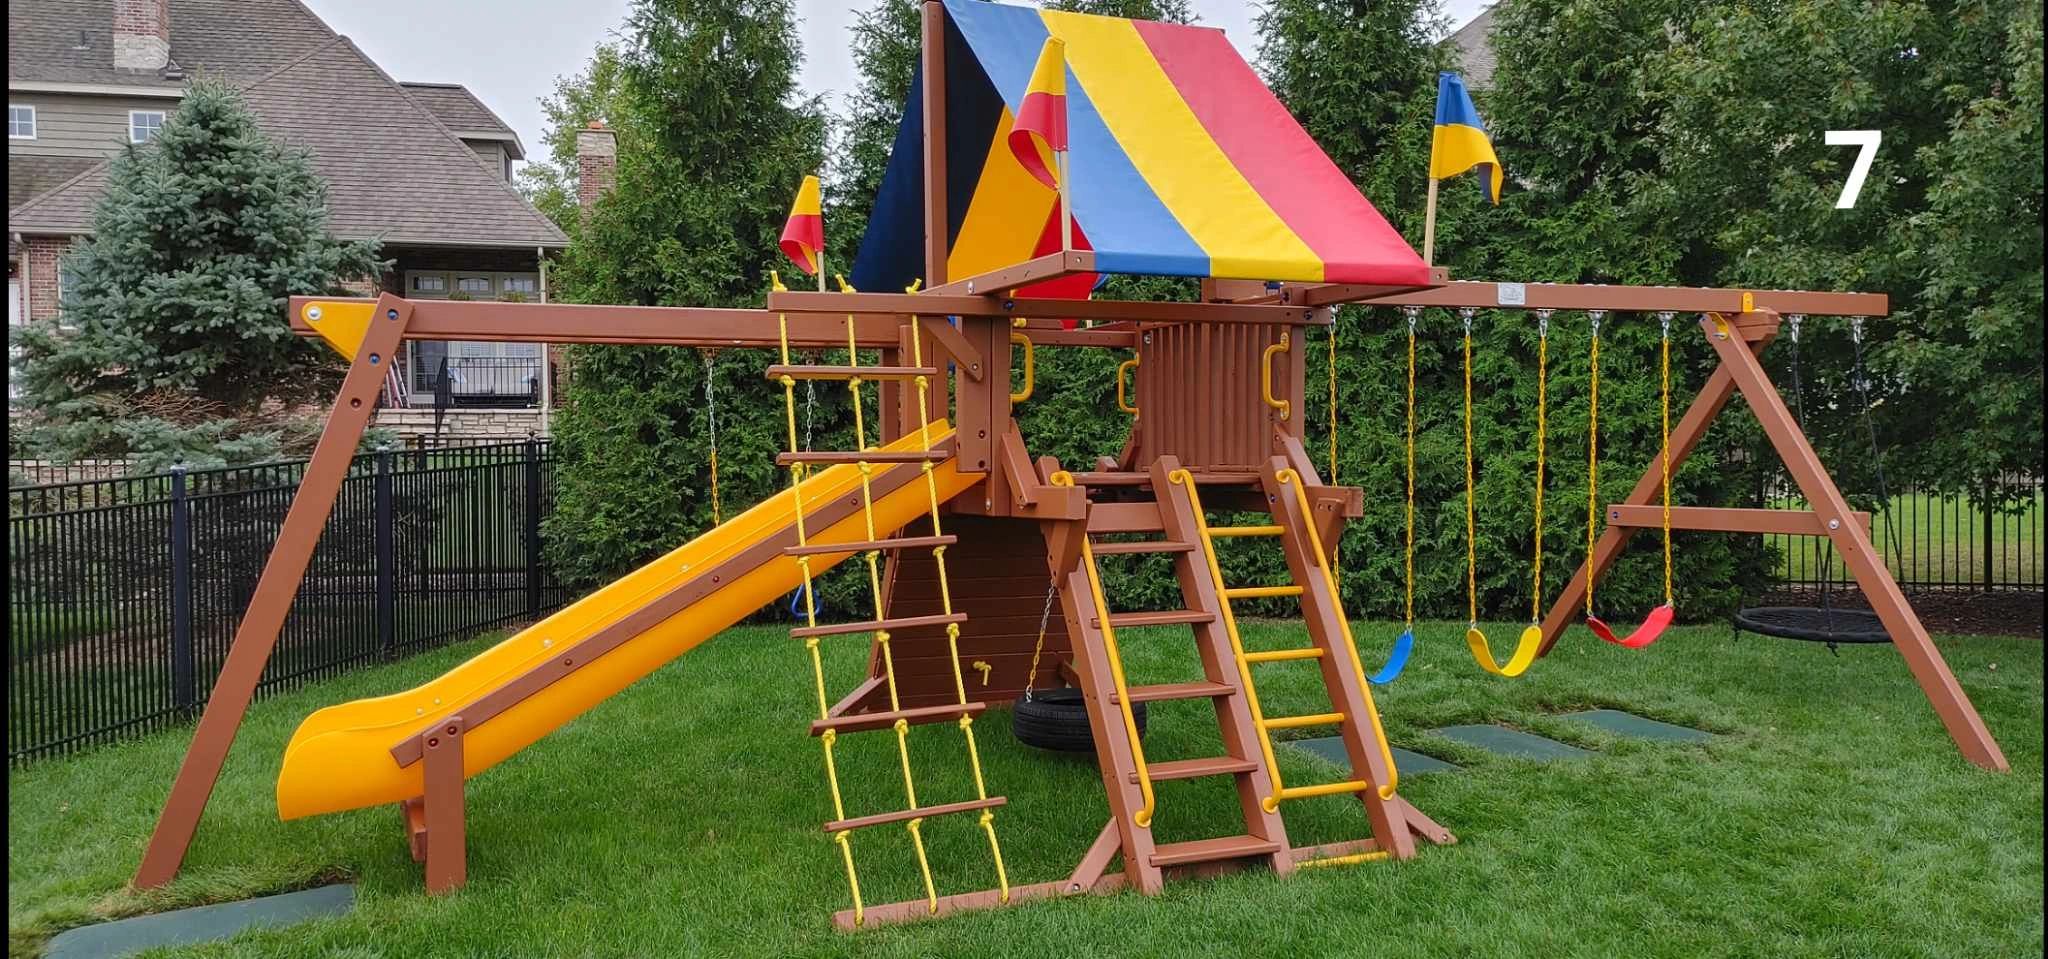 Rainbow Swingsets Playsets Ground Play Sets Swing - Illinois Playsets